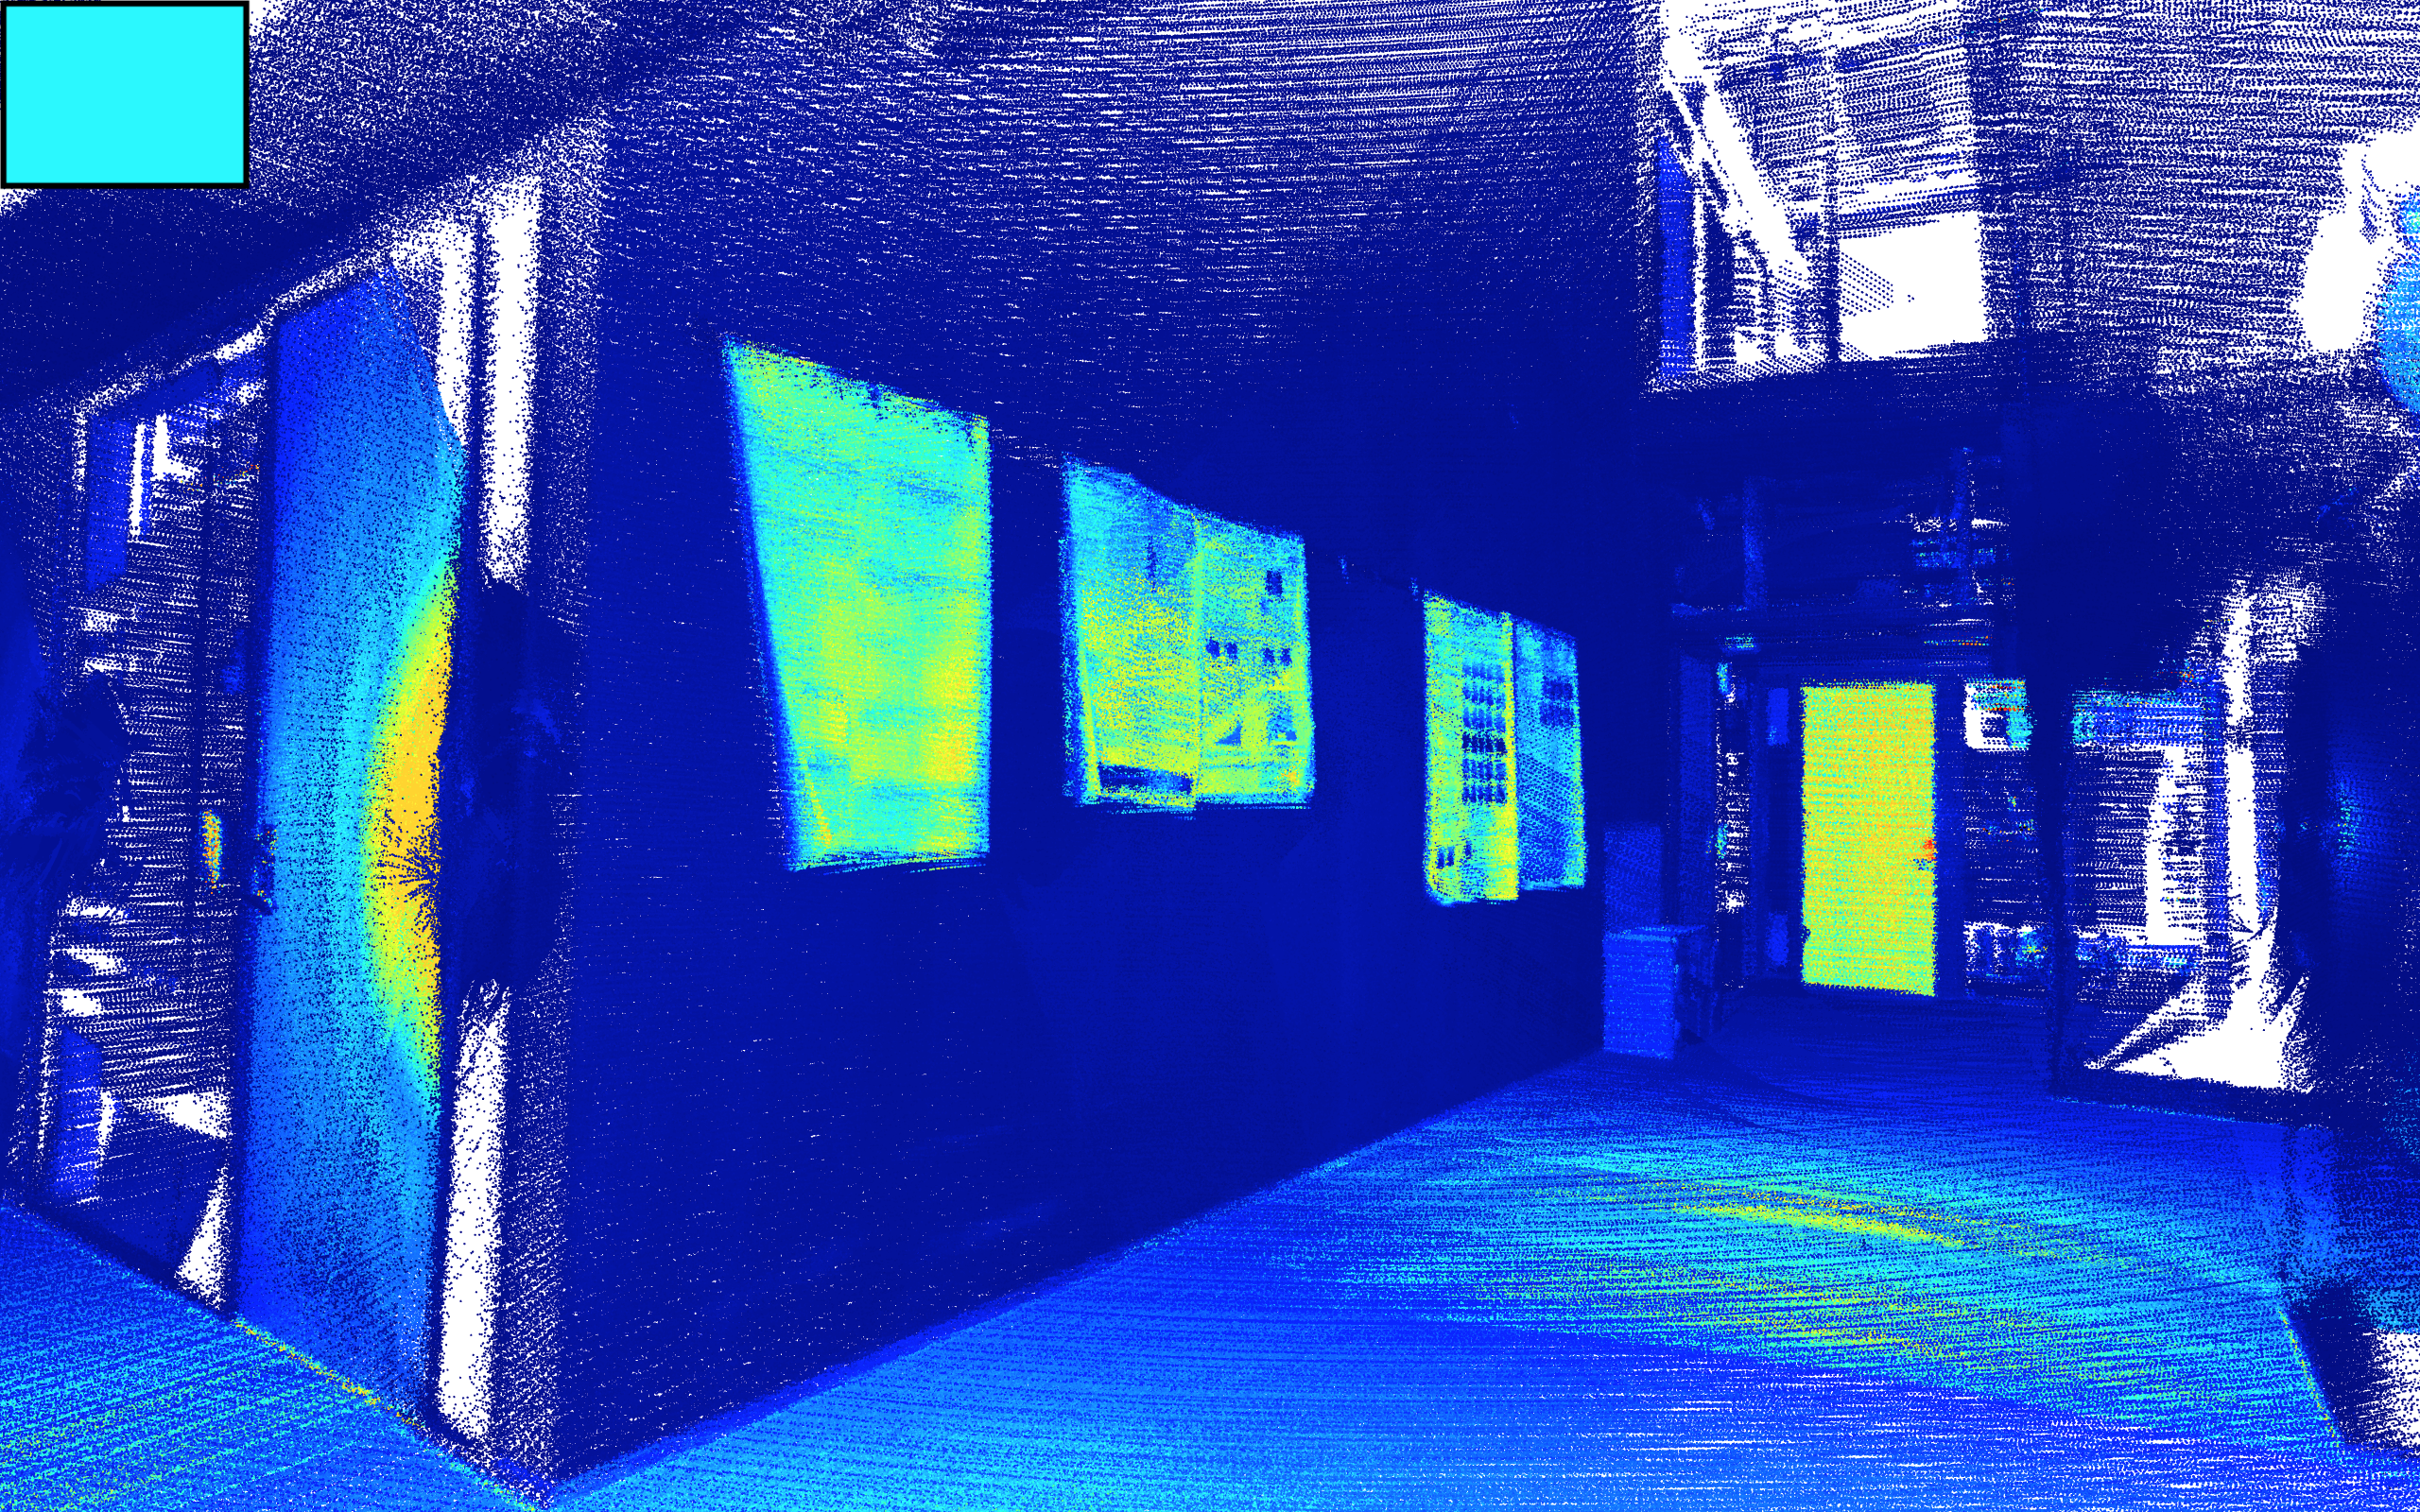 Hallway viewpoint 3 - point cloud